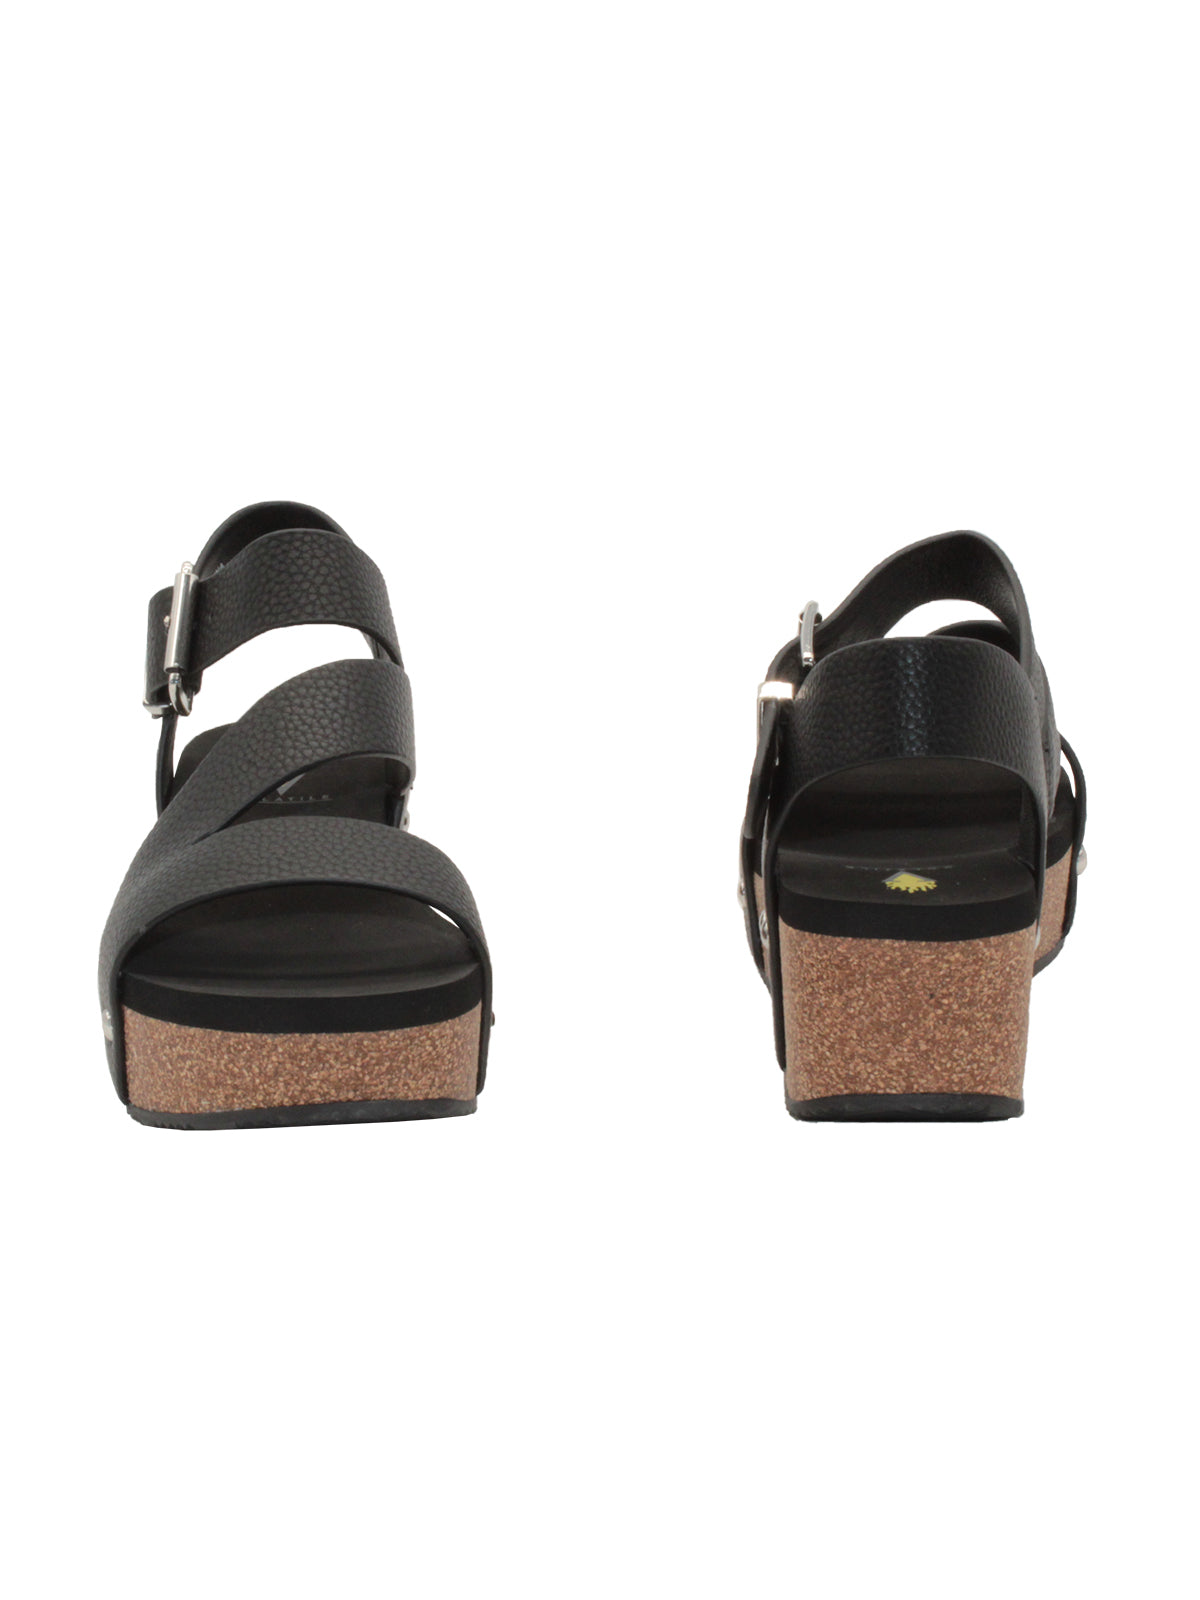 Vegan leather or heavy canvas asymmetrical upper Synthetic lining Adjustable metal buckle and metal clog studs Asymmetrical sandal with back strap Ultra comfort EVA insole Cork wedge Rubber traction outsole Approx. 2” heel height black f&B